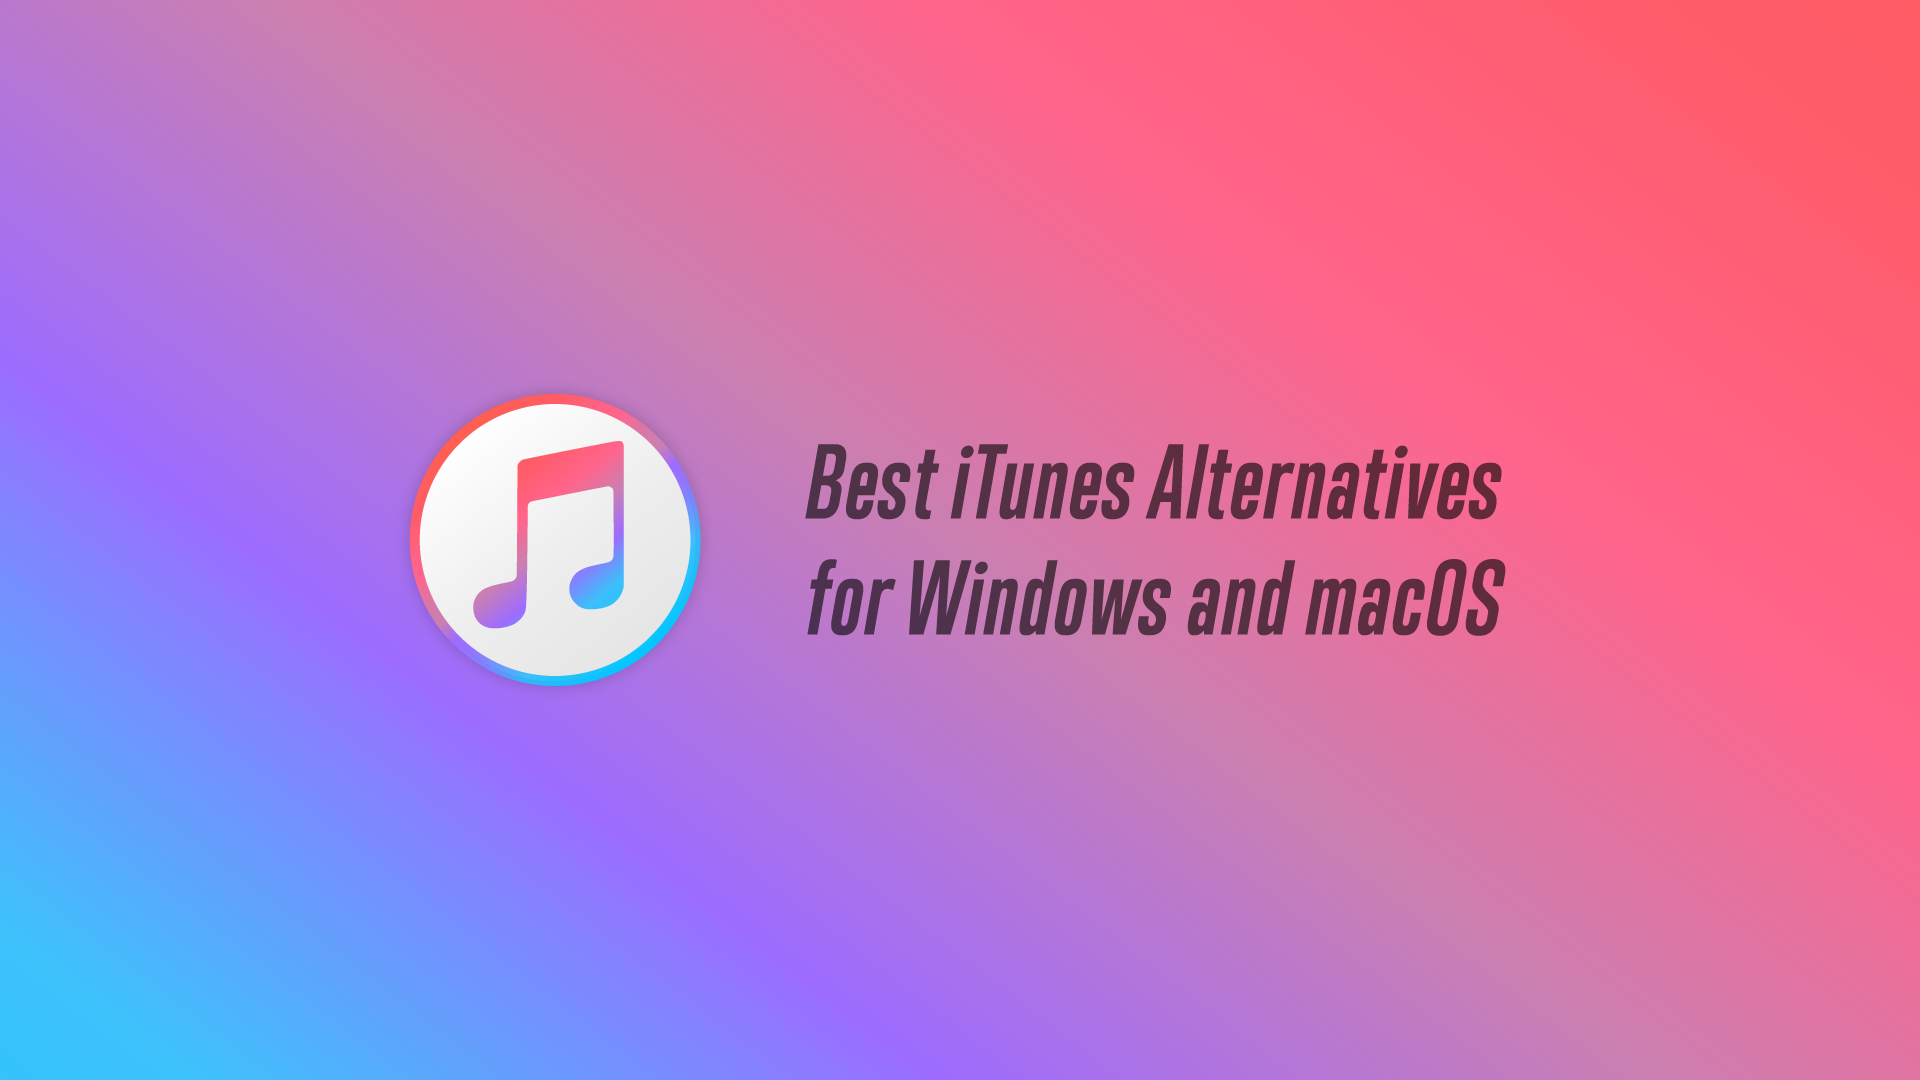 Best iTunes Alternatives for Windows and macOS